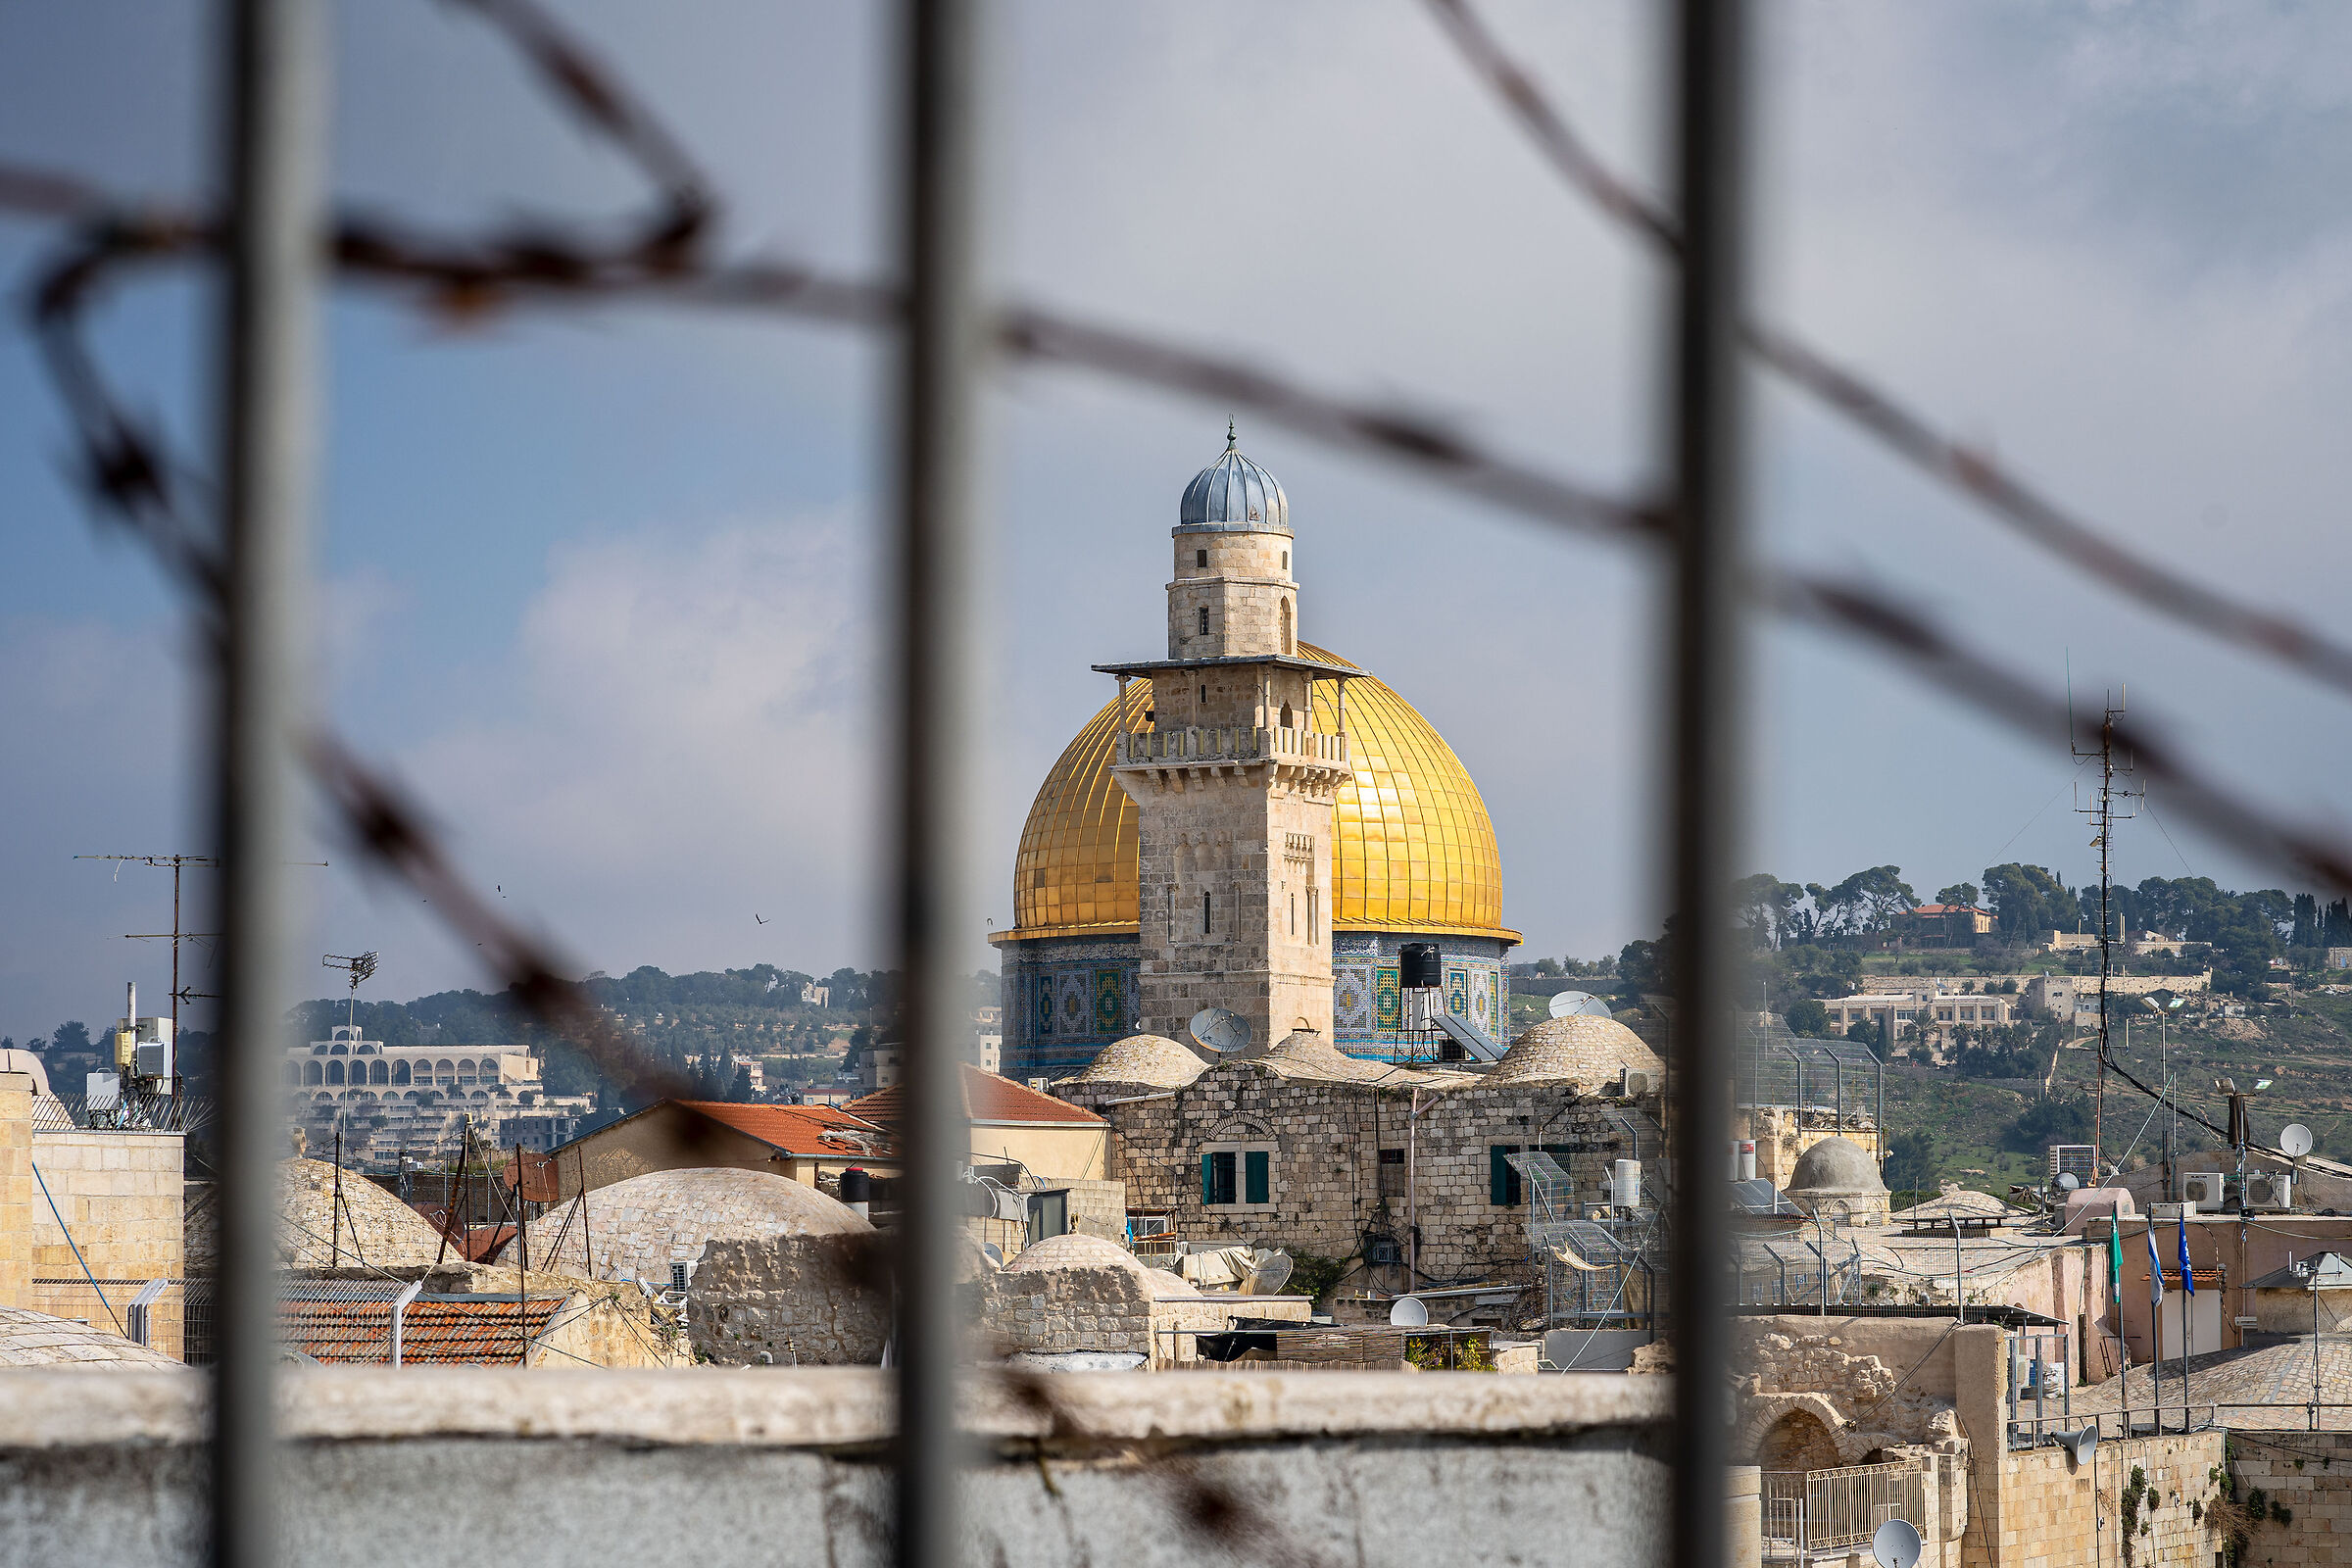 Fences, barbed wires and golden domes...